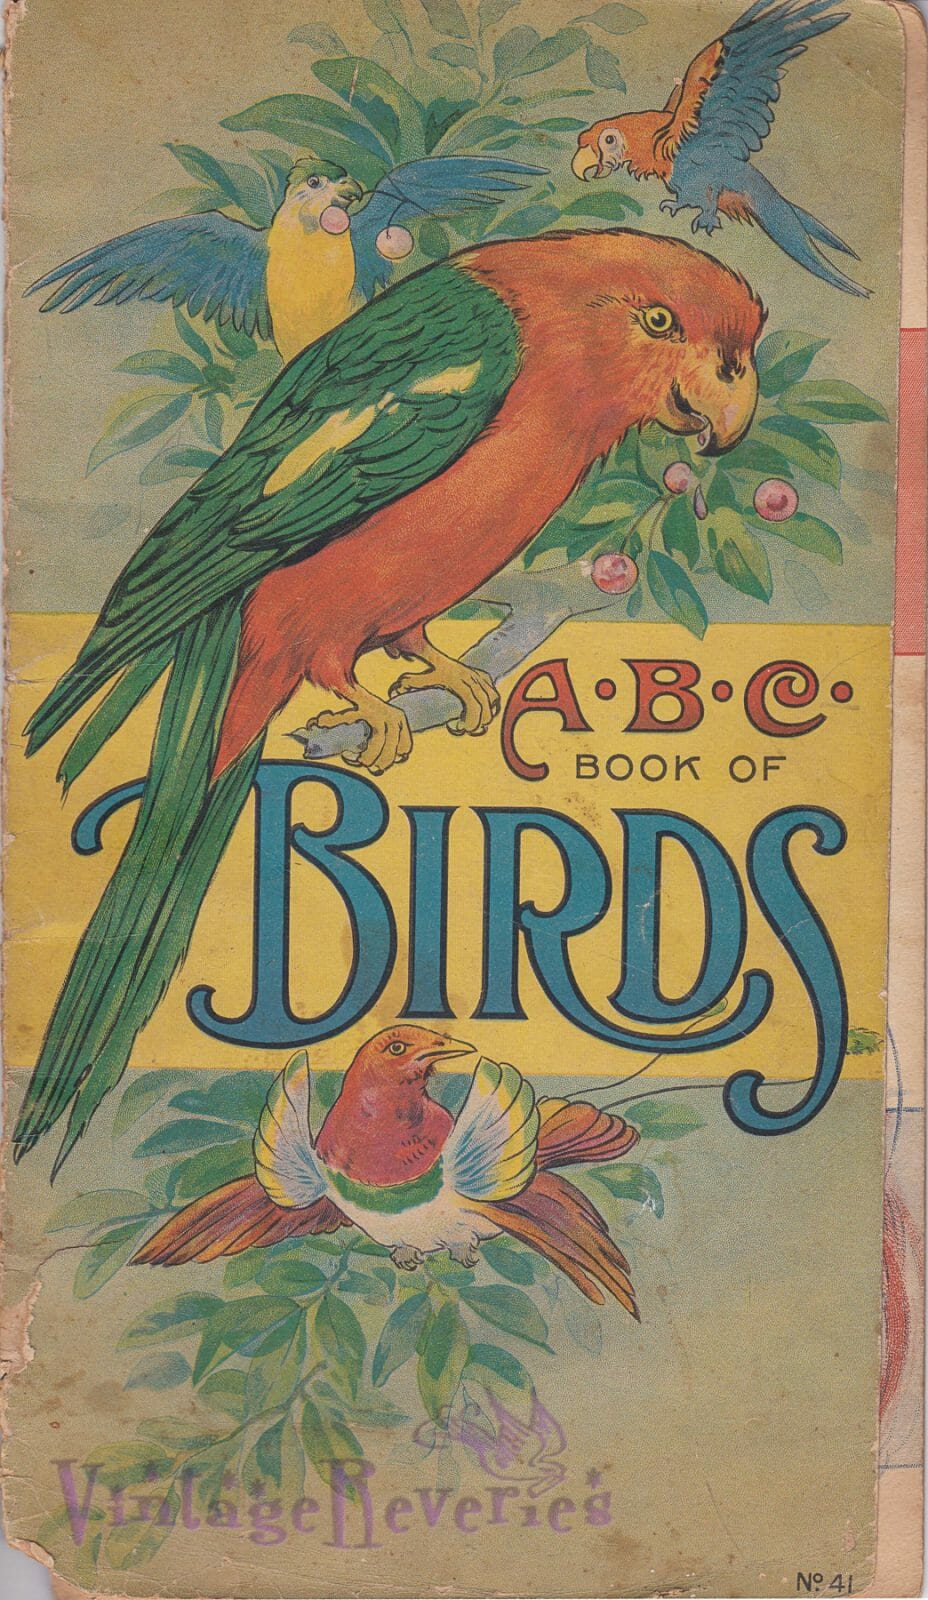 from the ABC Book of Birds (1916)